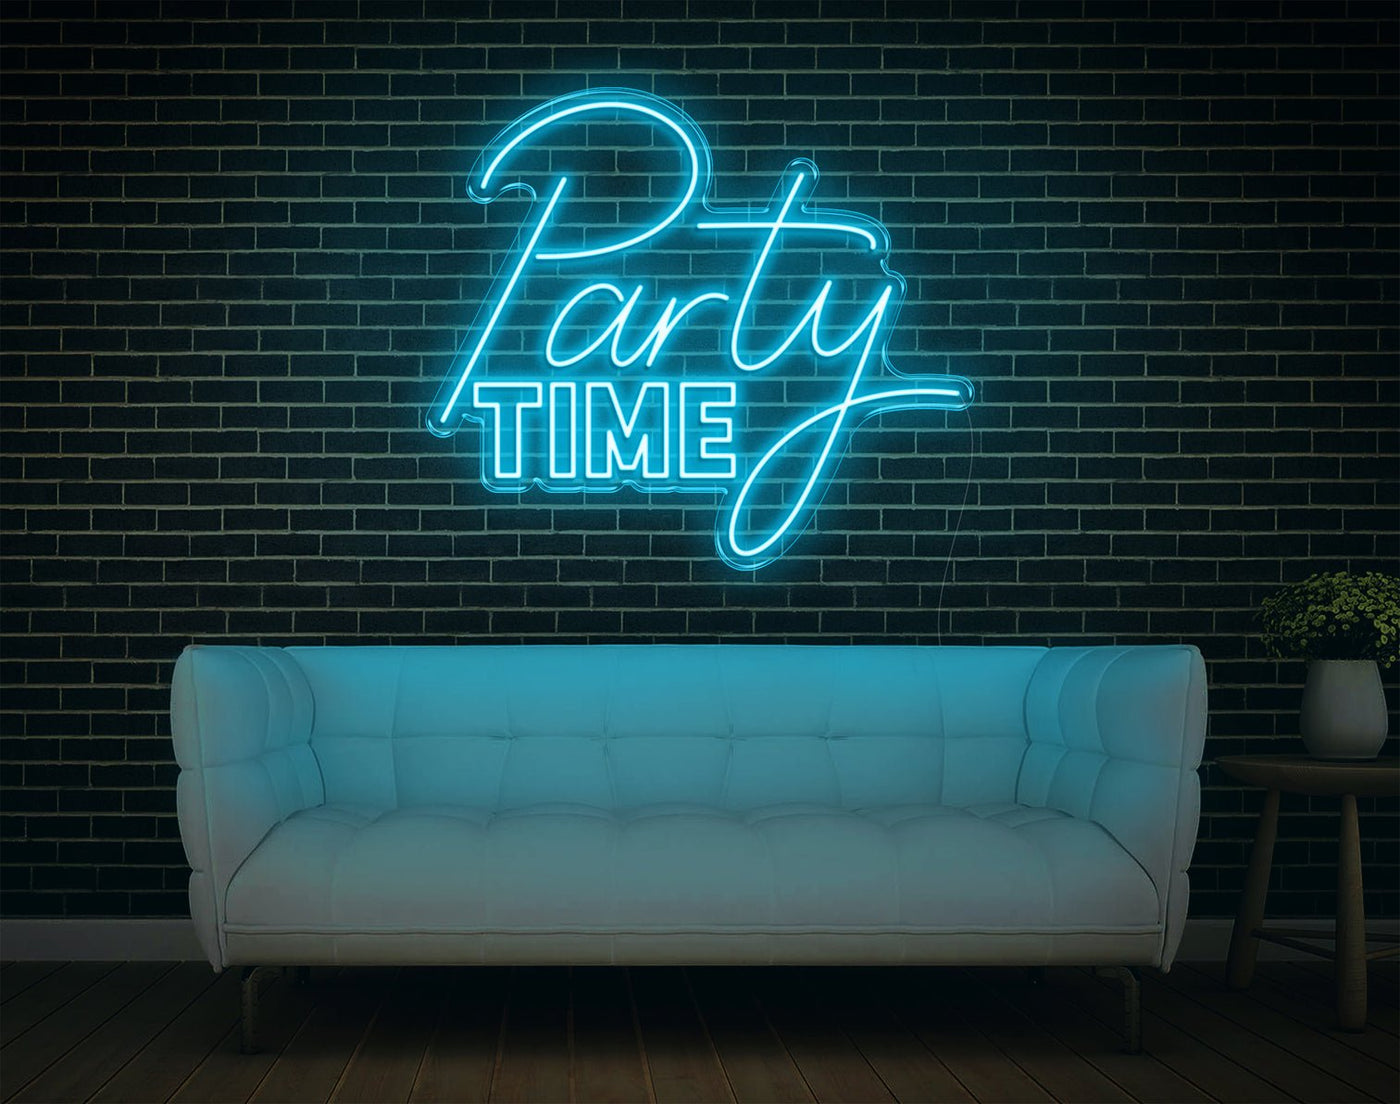 Party Time LED Neon Sign - 27inch x 31inchHot Pink